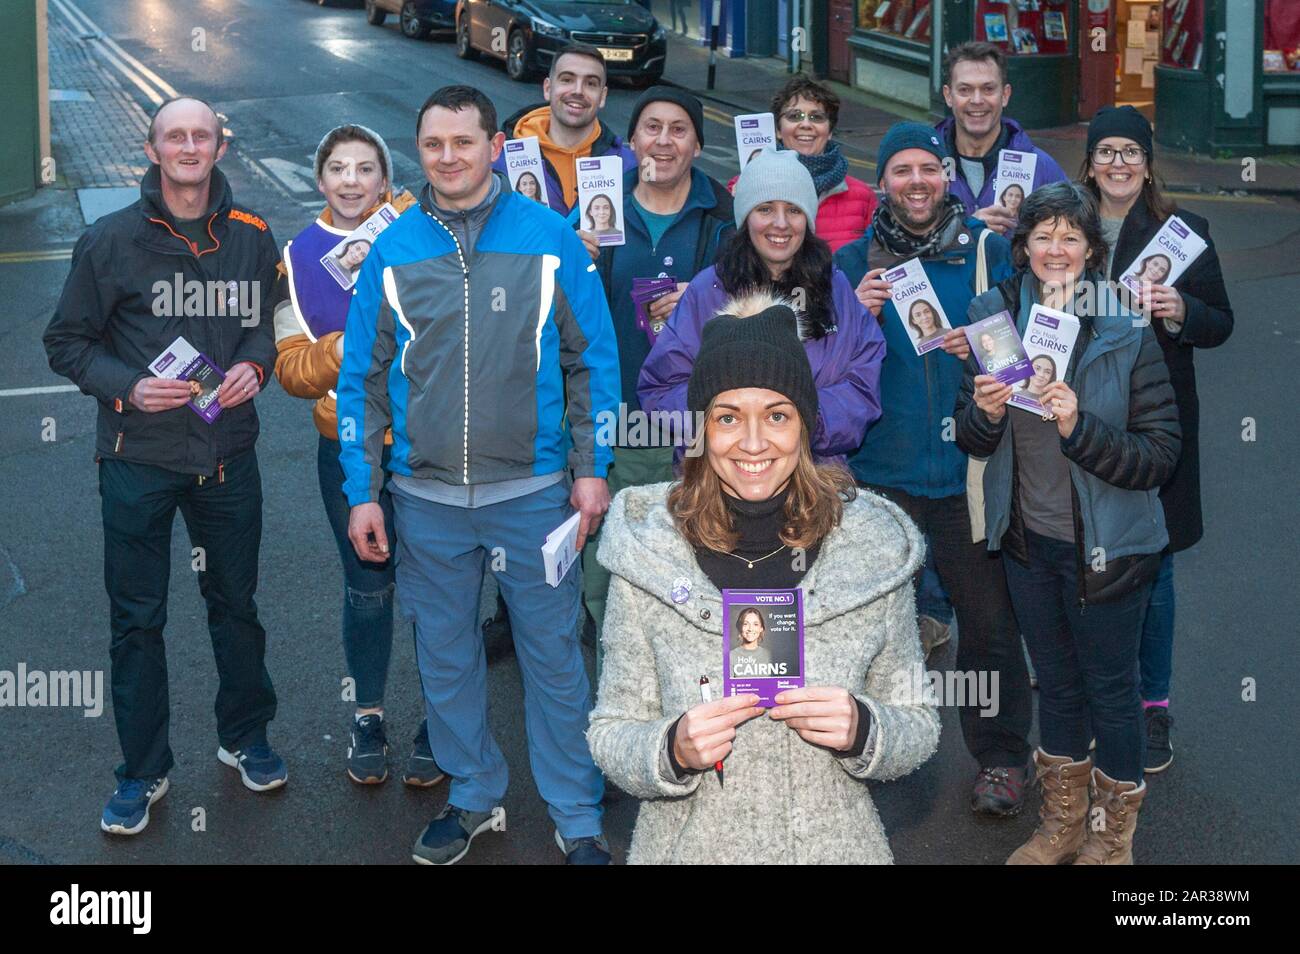 Bandon, West Cork, Ireland. 25th Jan, 2020. Election candidate Cllr. Holly Cairns (Social Democrats) and her team were out canvassing for votes in Bandon today.  Credit: Andy Gibson/Alamy Live News Stock Photo